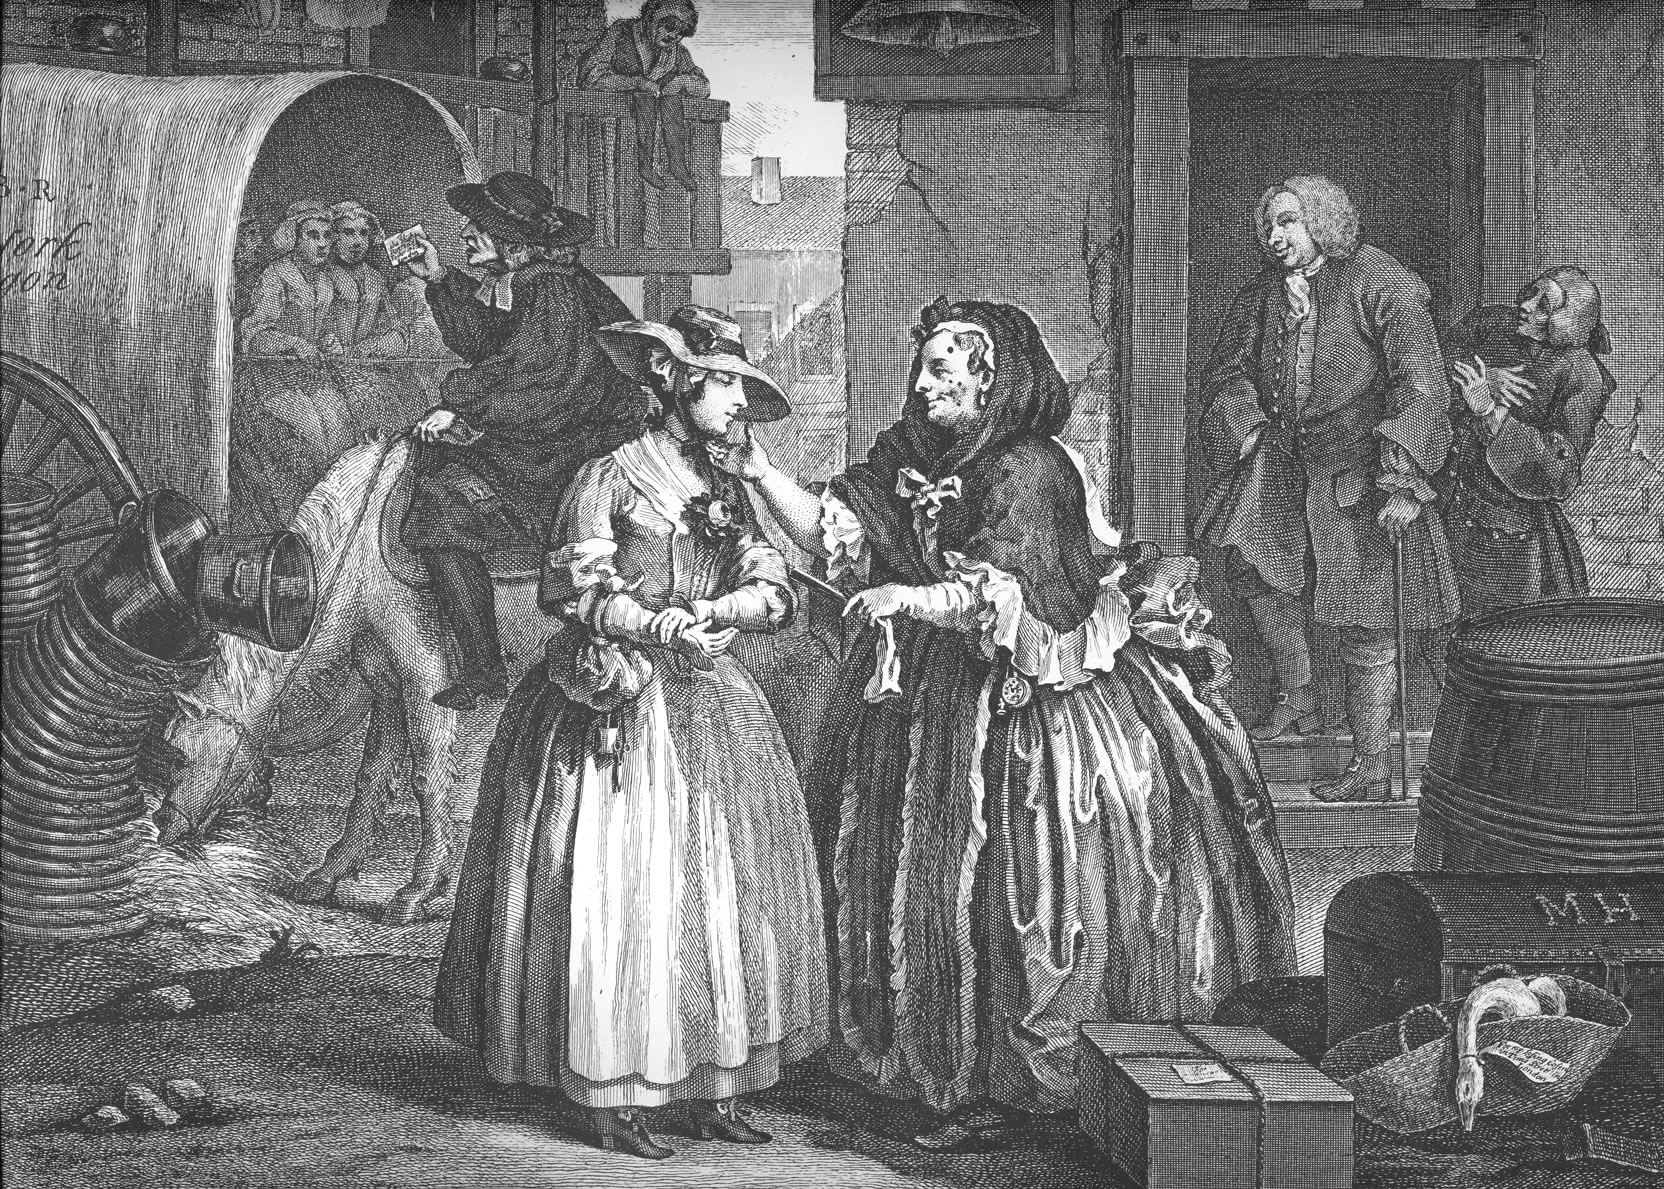 In the foreground, a beautiful young woman stands in front of an older woman, who is examining the younger’s face. The older woman is larger and has prominent moles on her face. In the background two men stand in a doorway and appear to be ridiculing a pastor who is preaching from horseback.